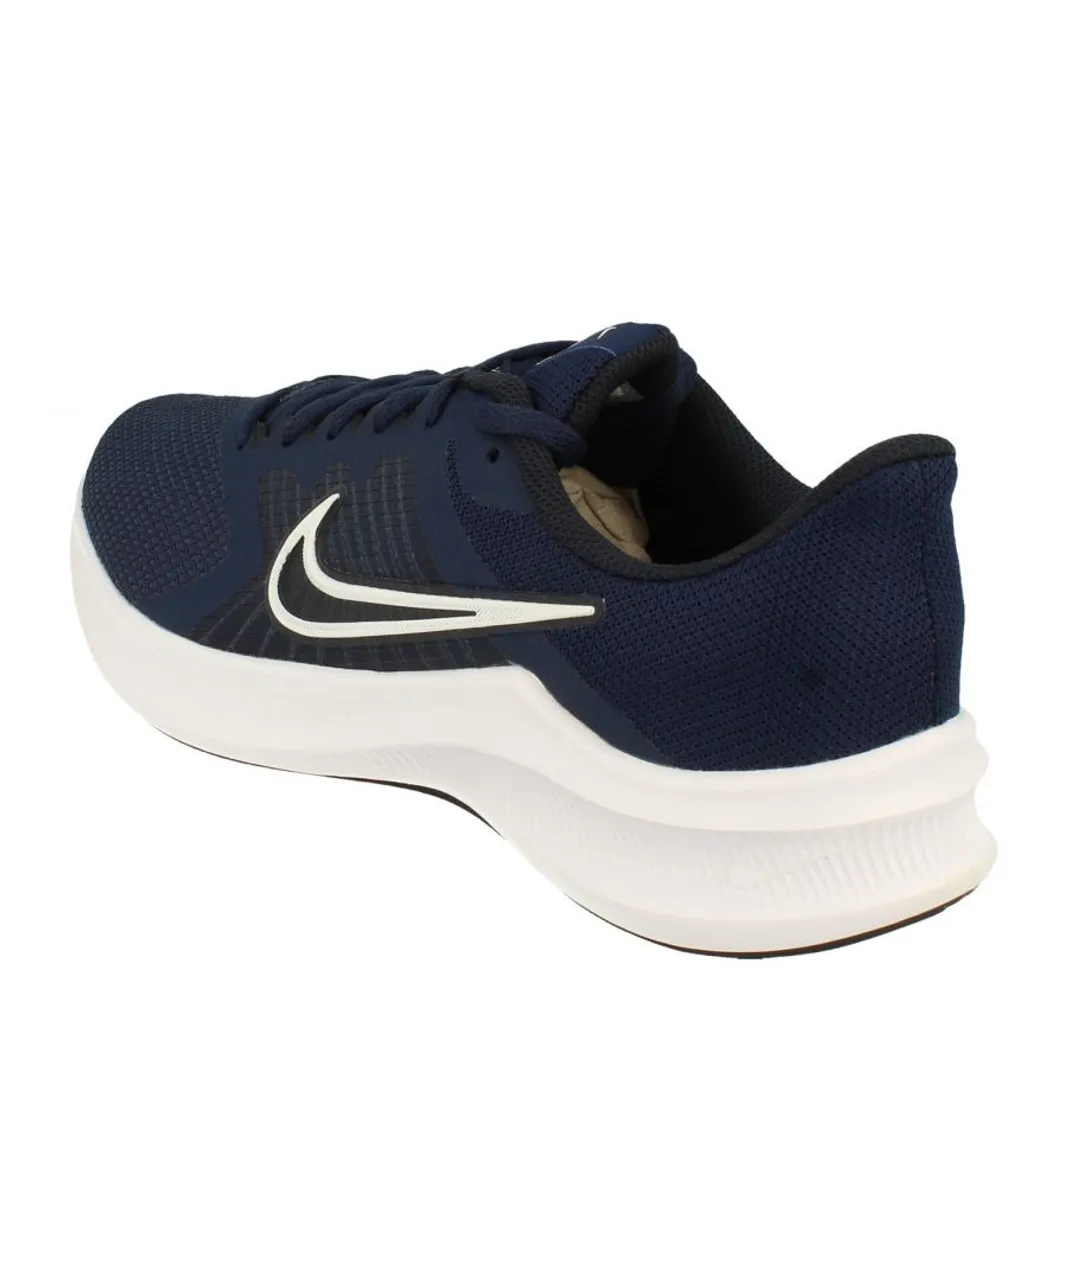 Nike Downshifter 11 Mens Navy Trainers